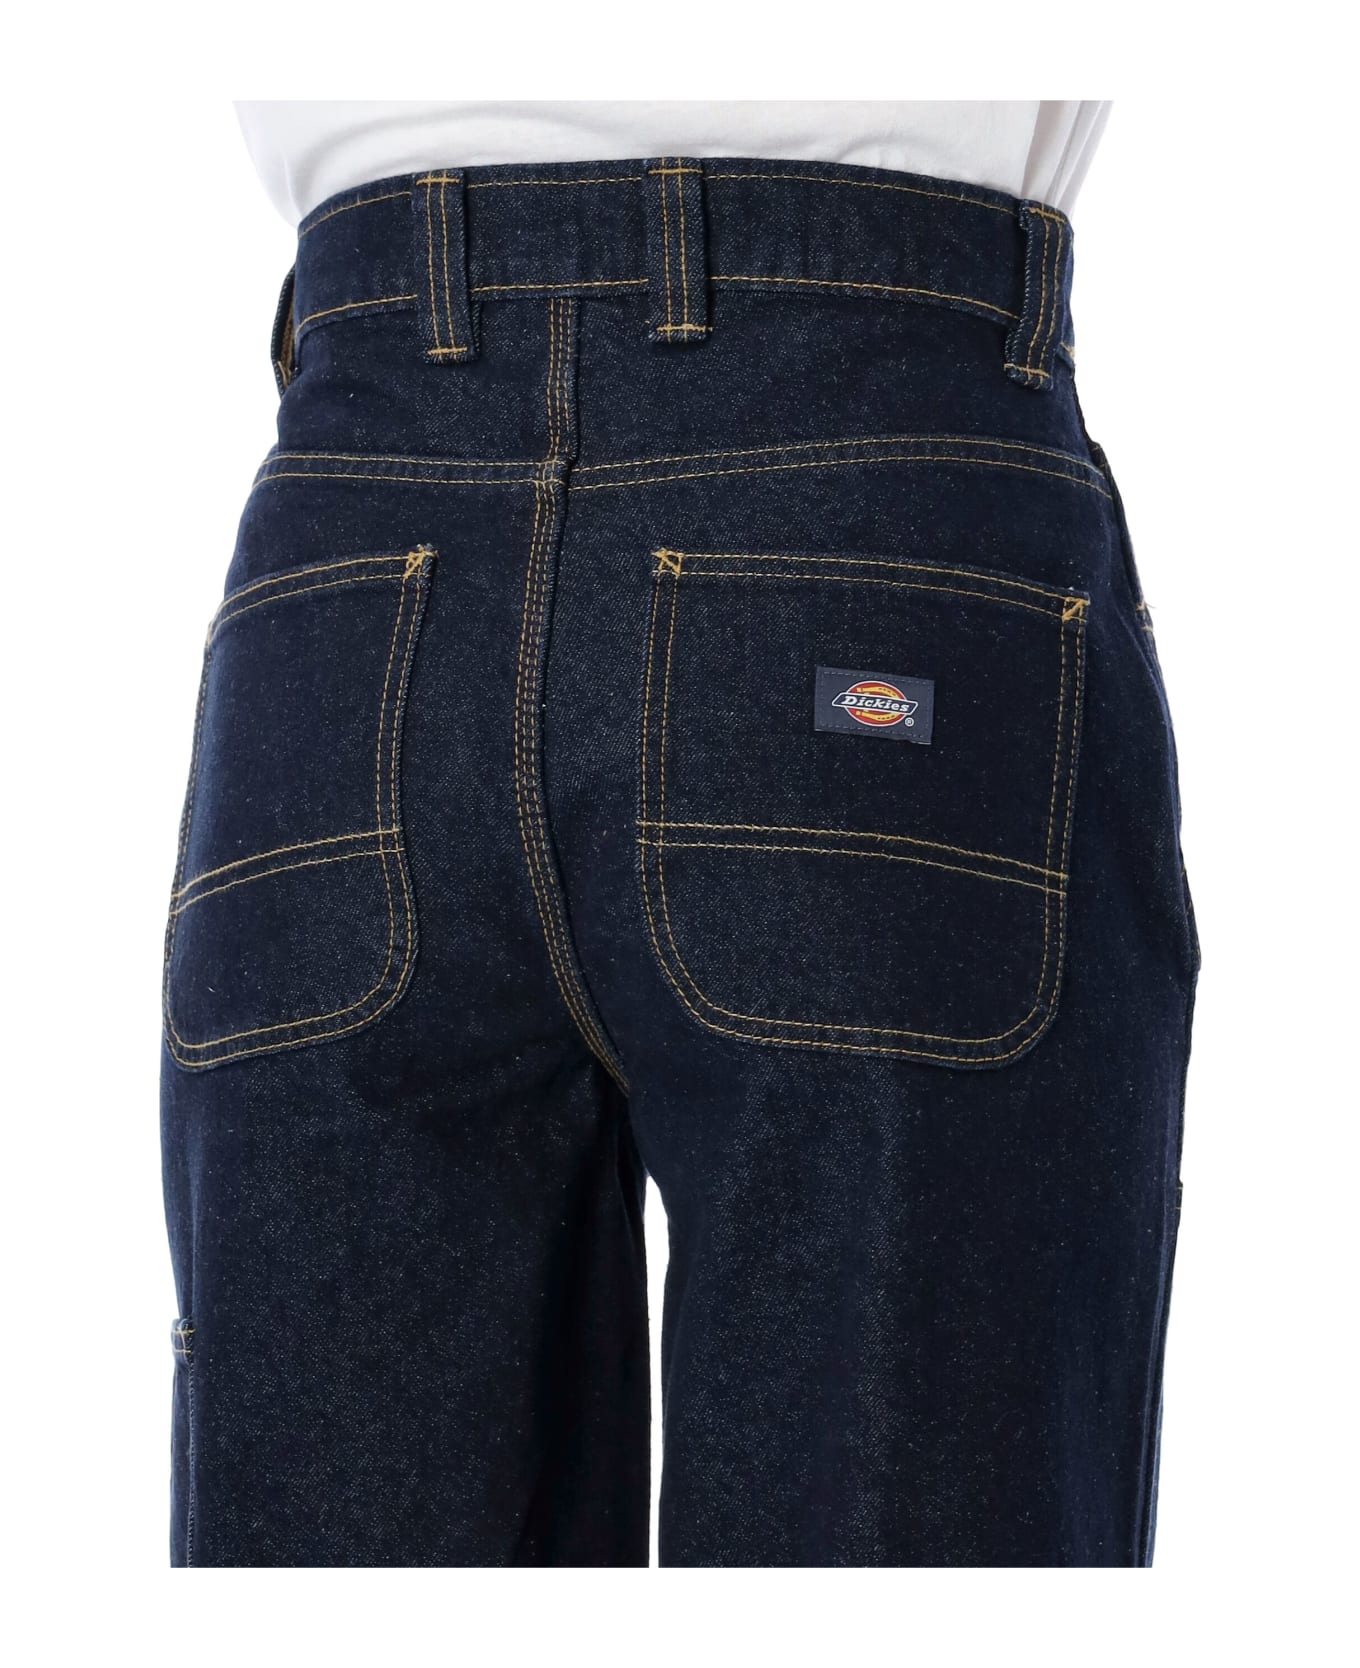 Dickies Madison Double Knee Jeans - BLUE RINSED デニム